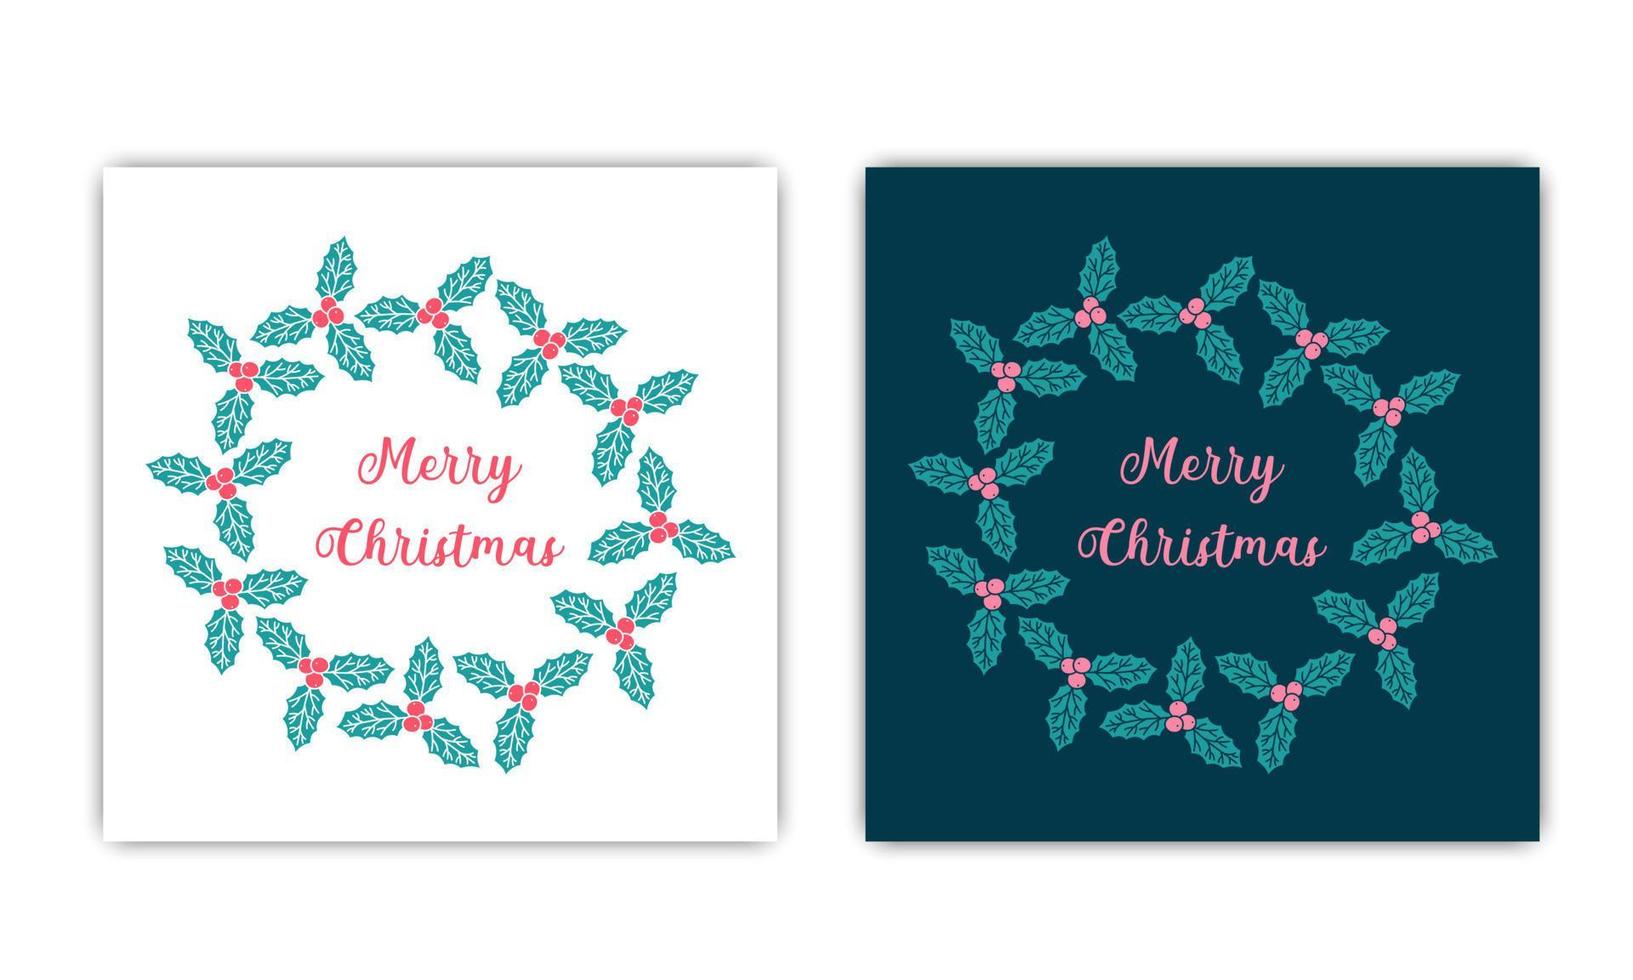 Merry Christmas greeting cards set. Text inside round frame. Decorative wreath with holly leaves and berries. Cute Christmas border isolated on white and dark background. Vector illustration